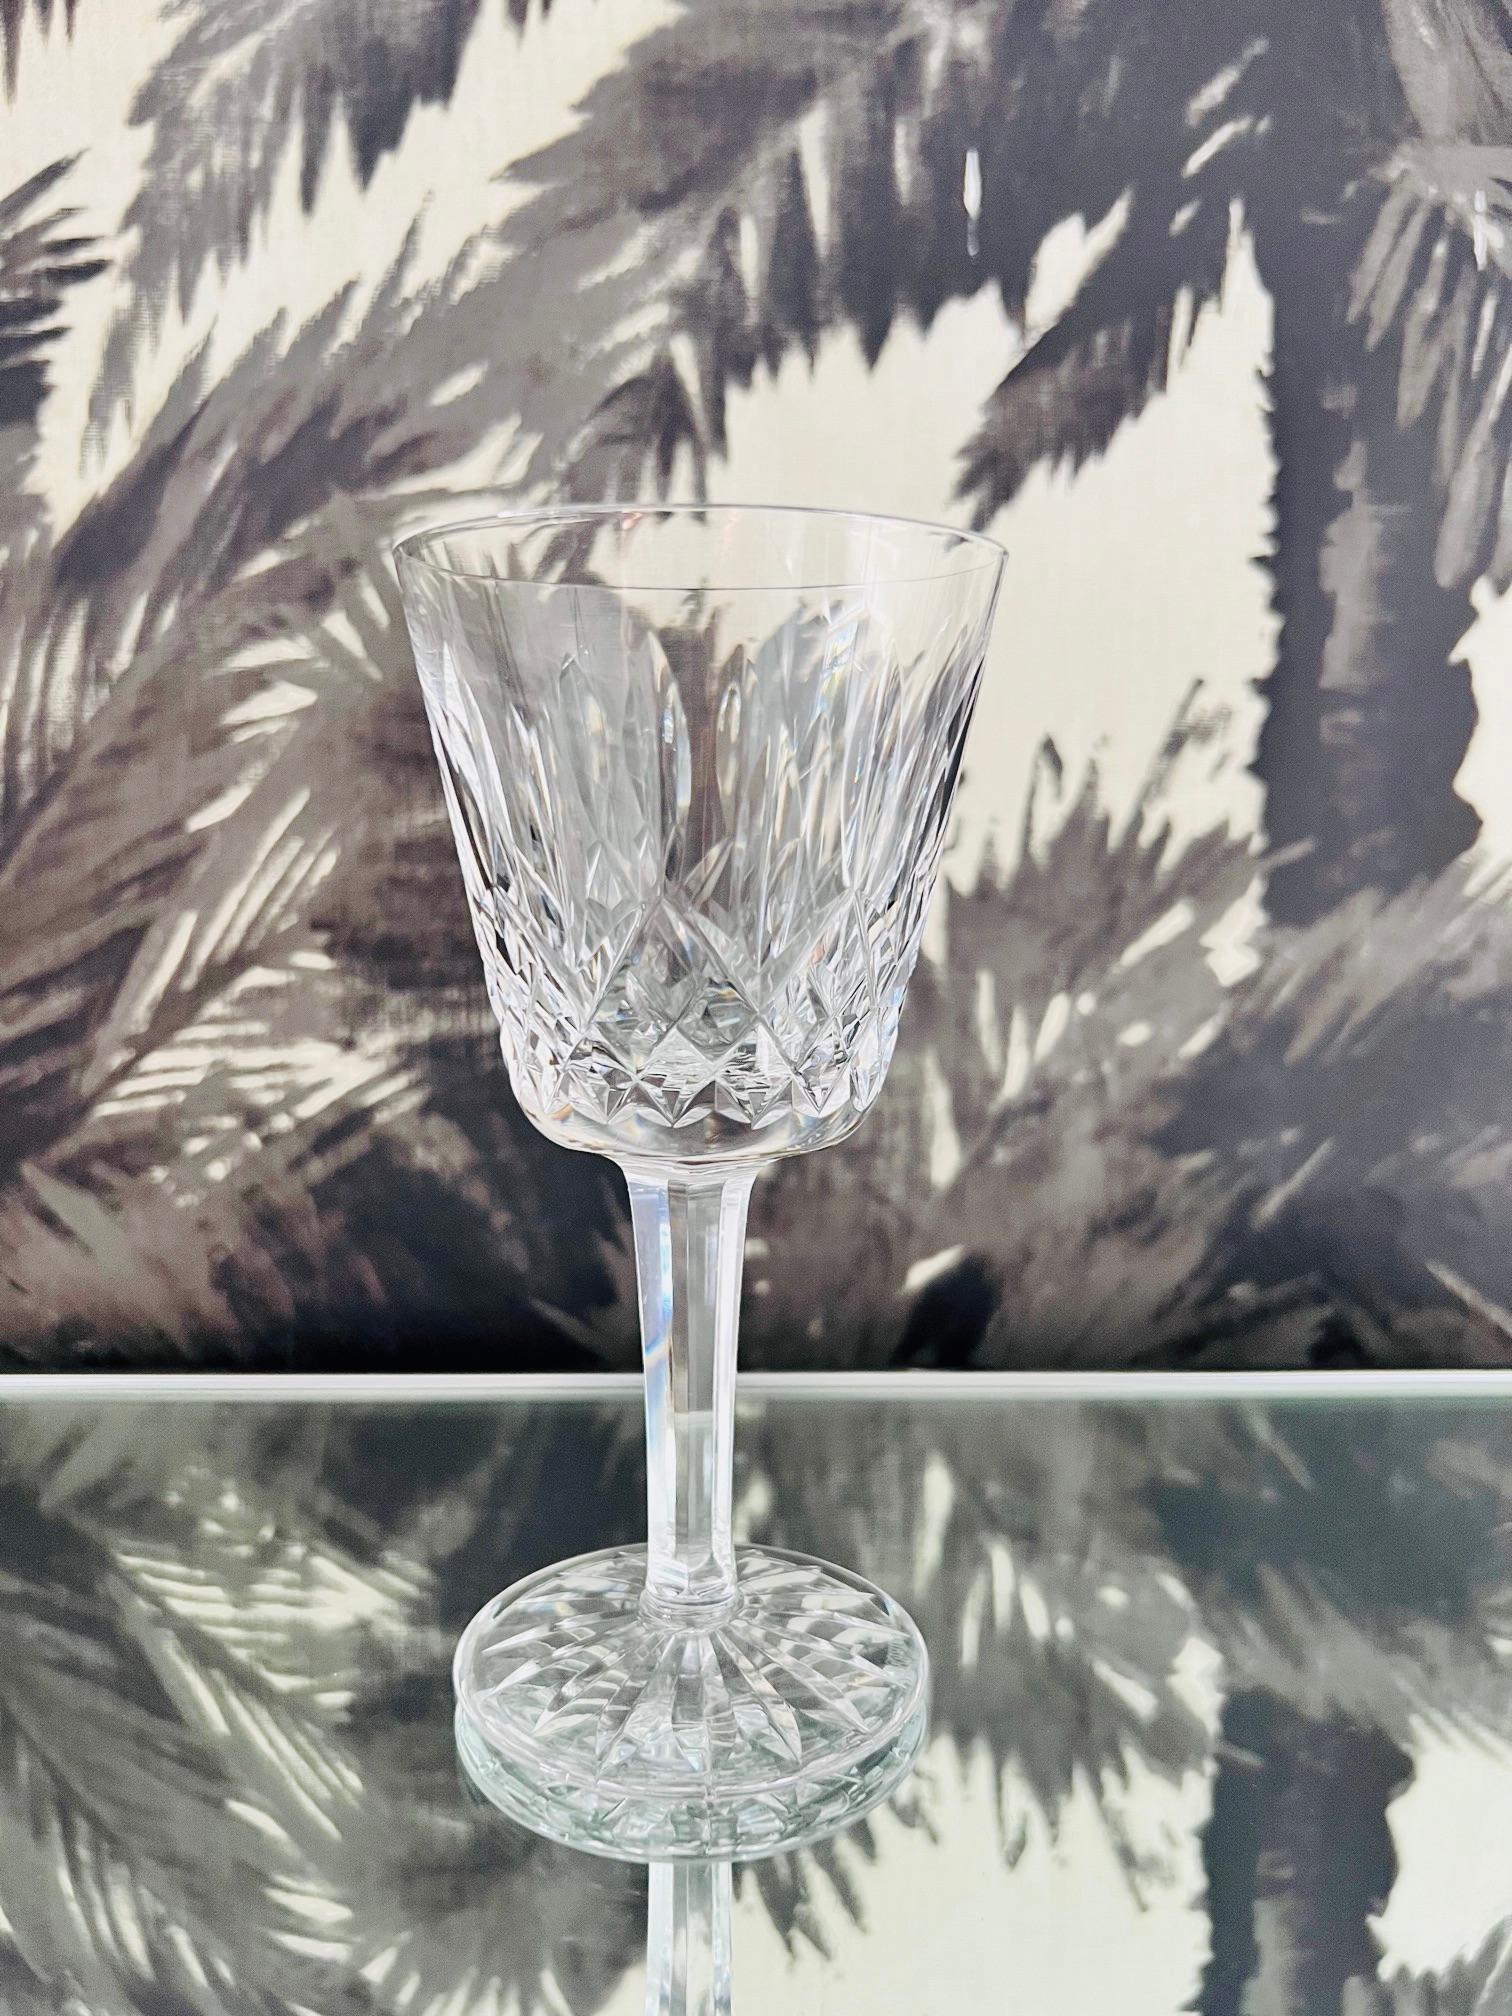 Single luxe crystal wine glass from Waterford Crystal. The Lismore Collection is perhaps Waterford's most distinguished design featuring hand blown crystal with the pattern's signature diamond and wedge cuts. First introduced in the early 1950s, the